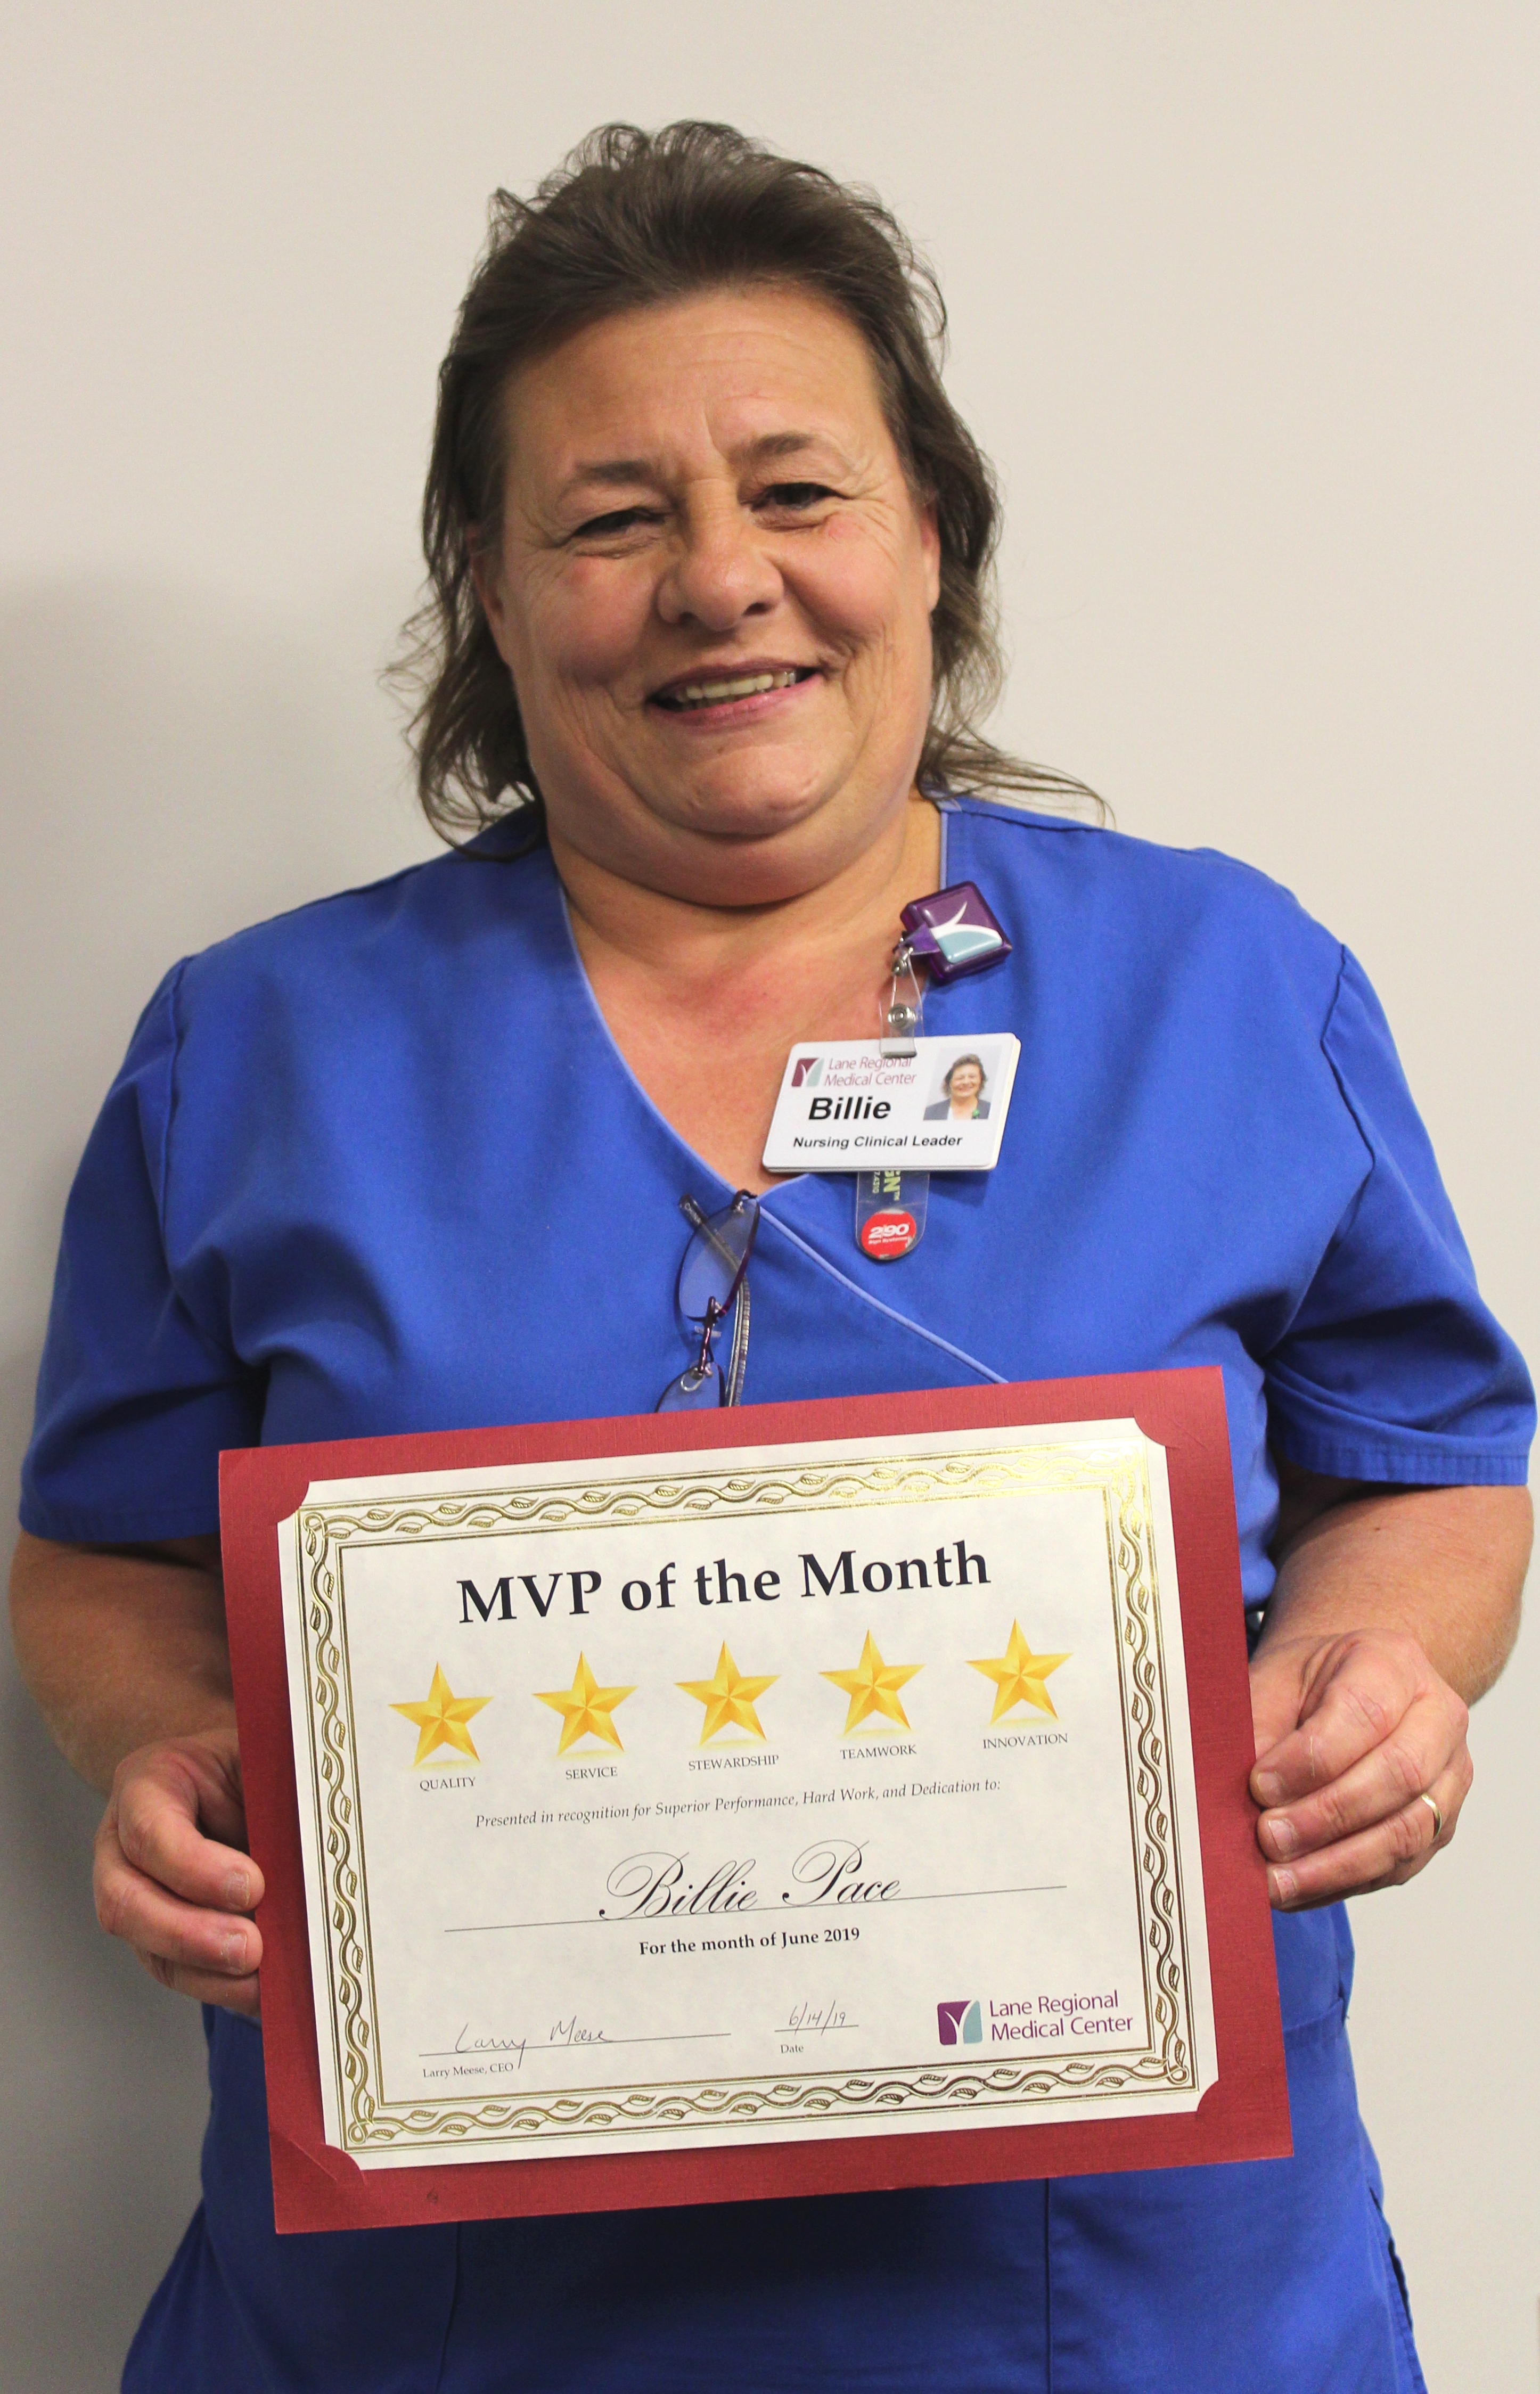 Billie Pace, RN Selected June MVP of the Month